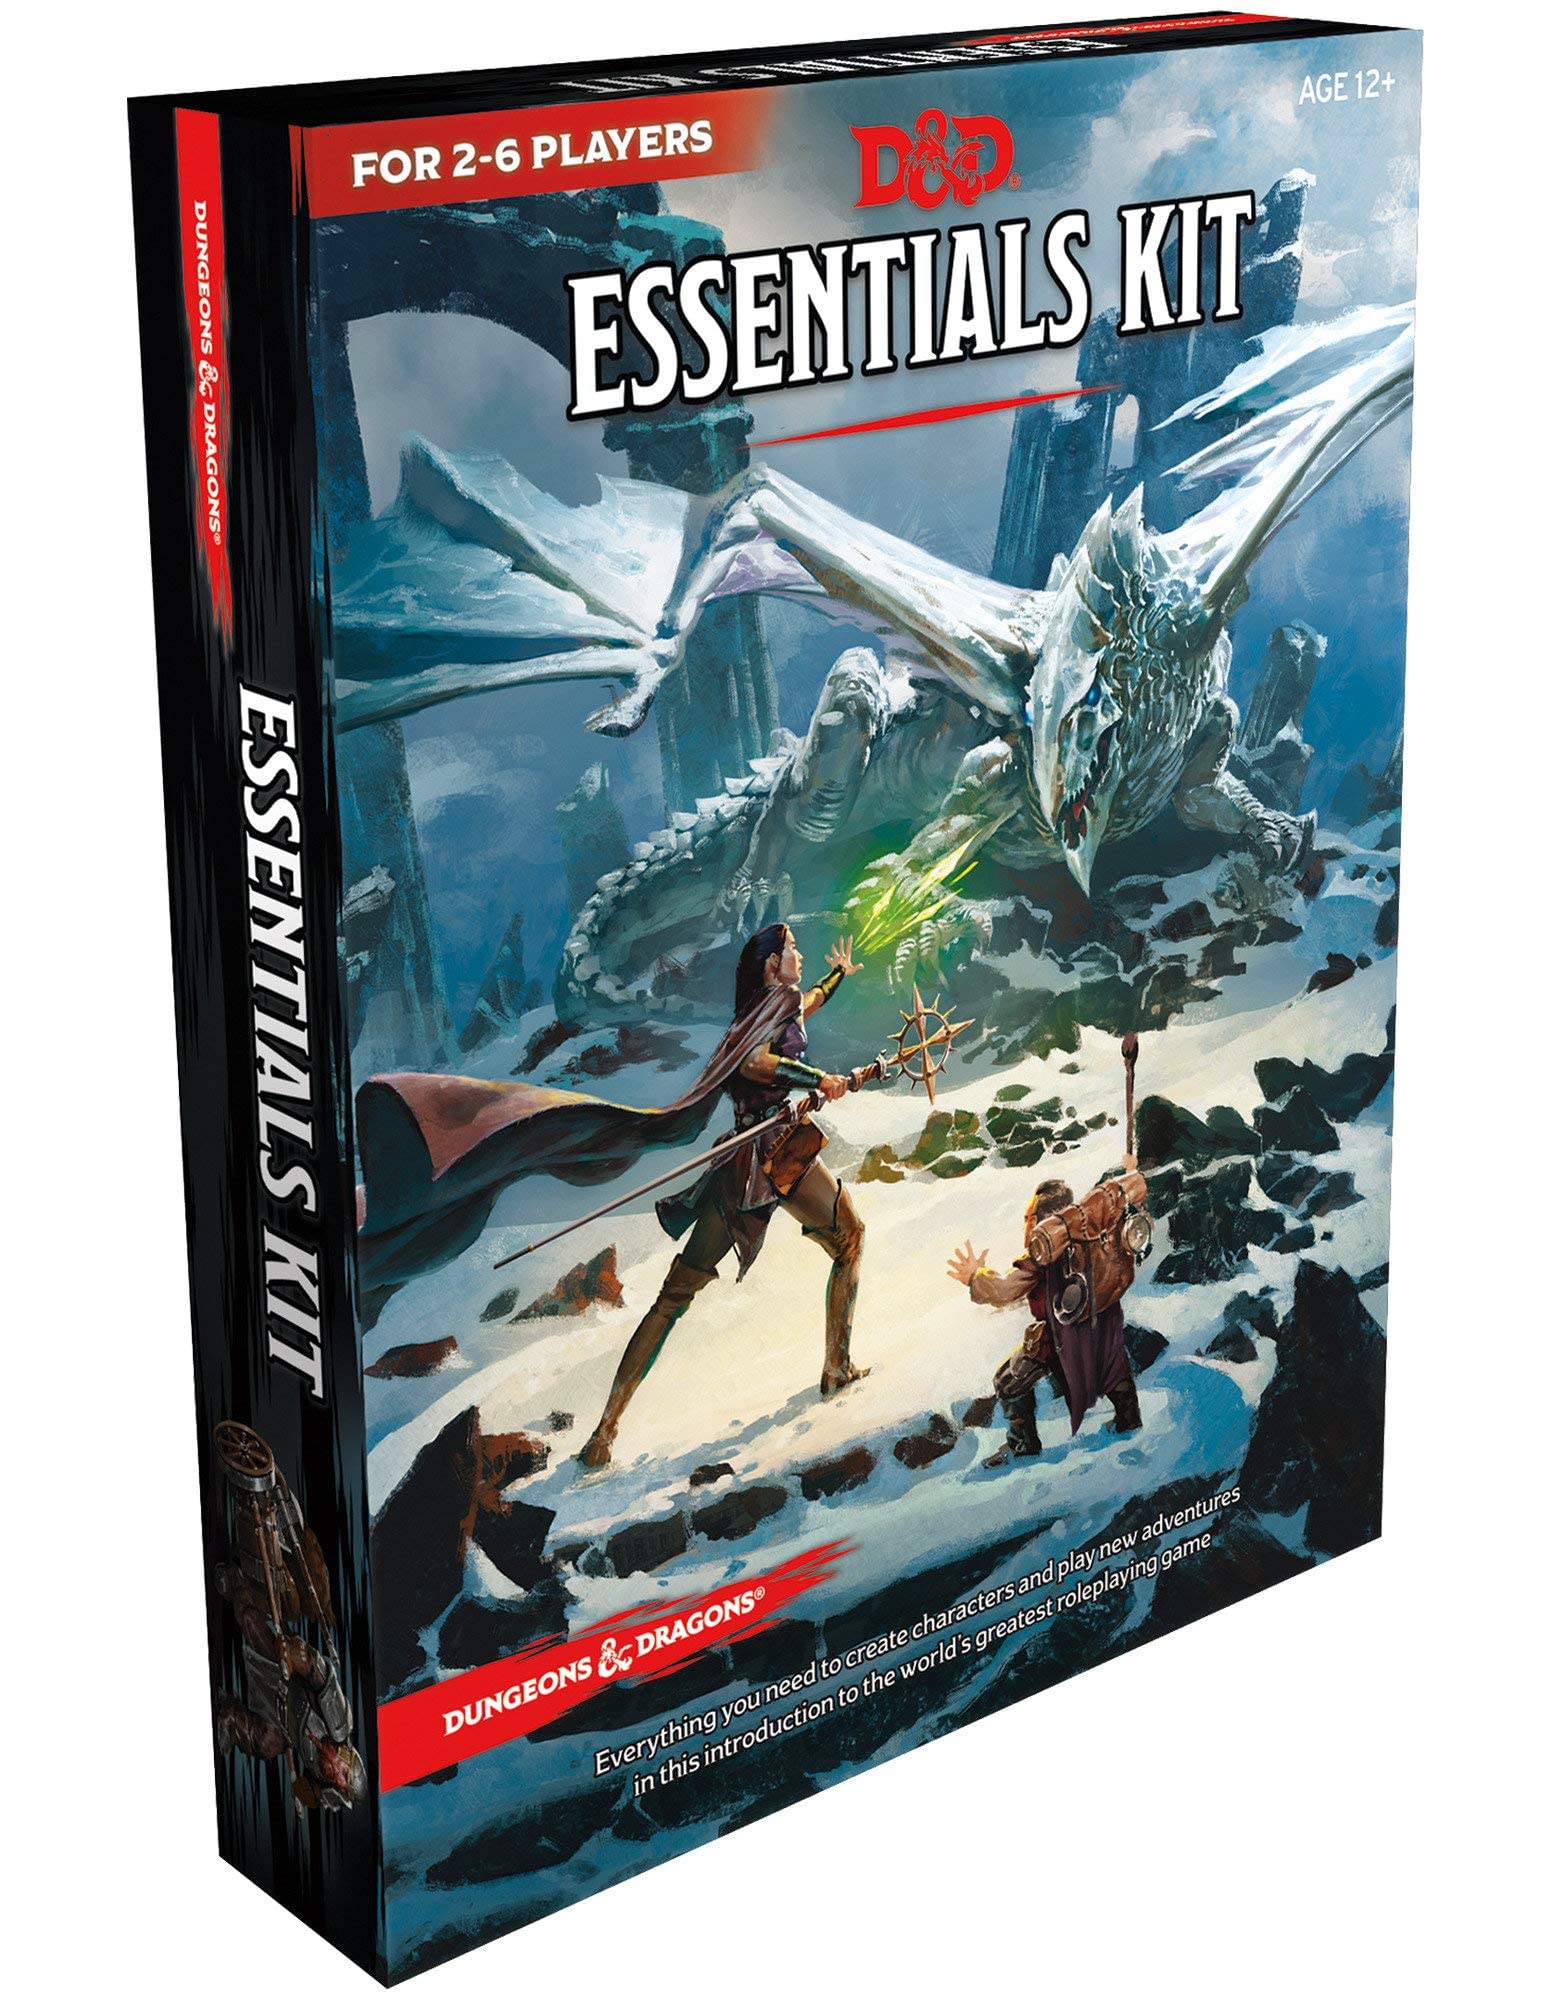 D&D Essentials Kit (Dungeons & Dragons Intro Adventure Set) Age Range:12 Years & Up